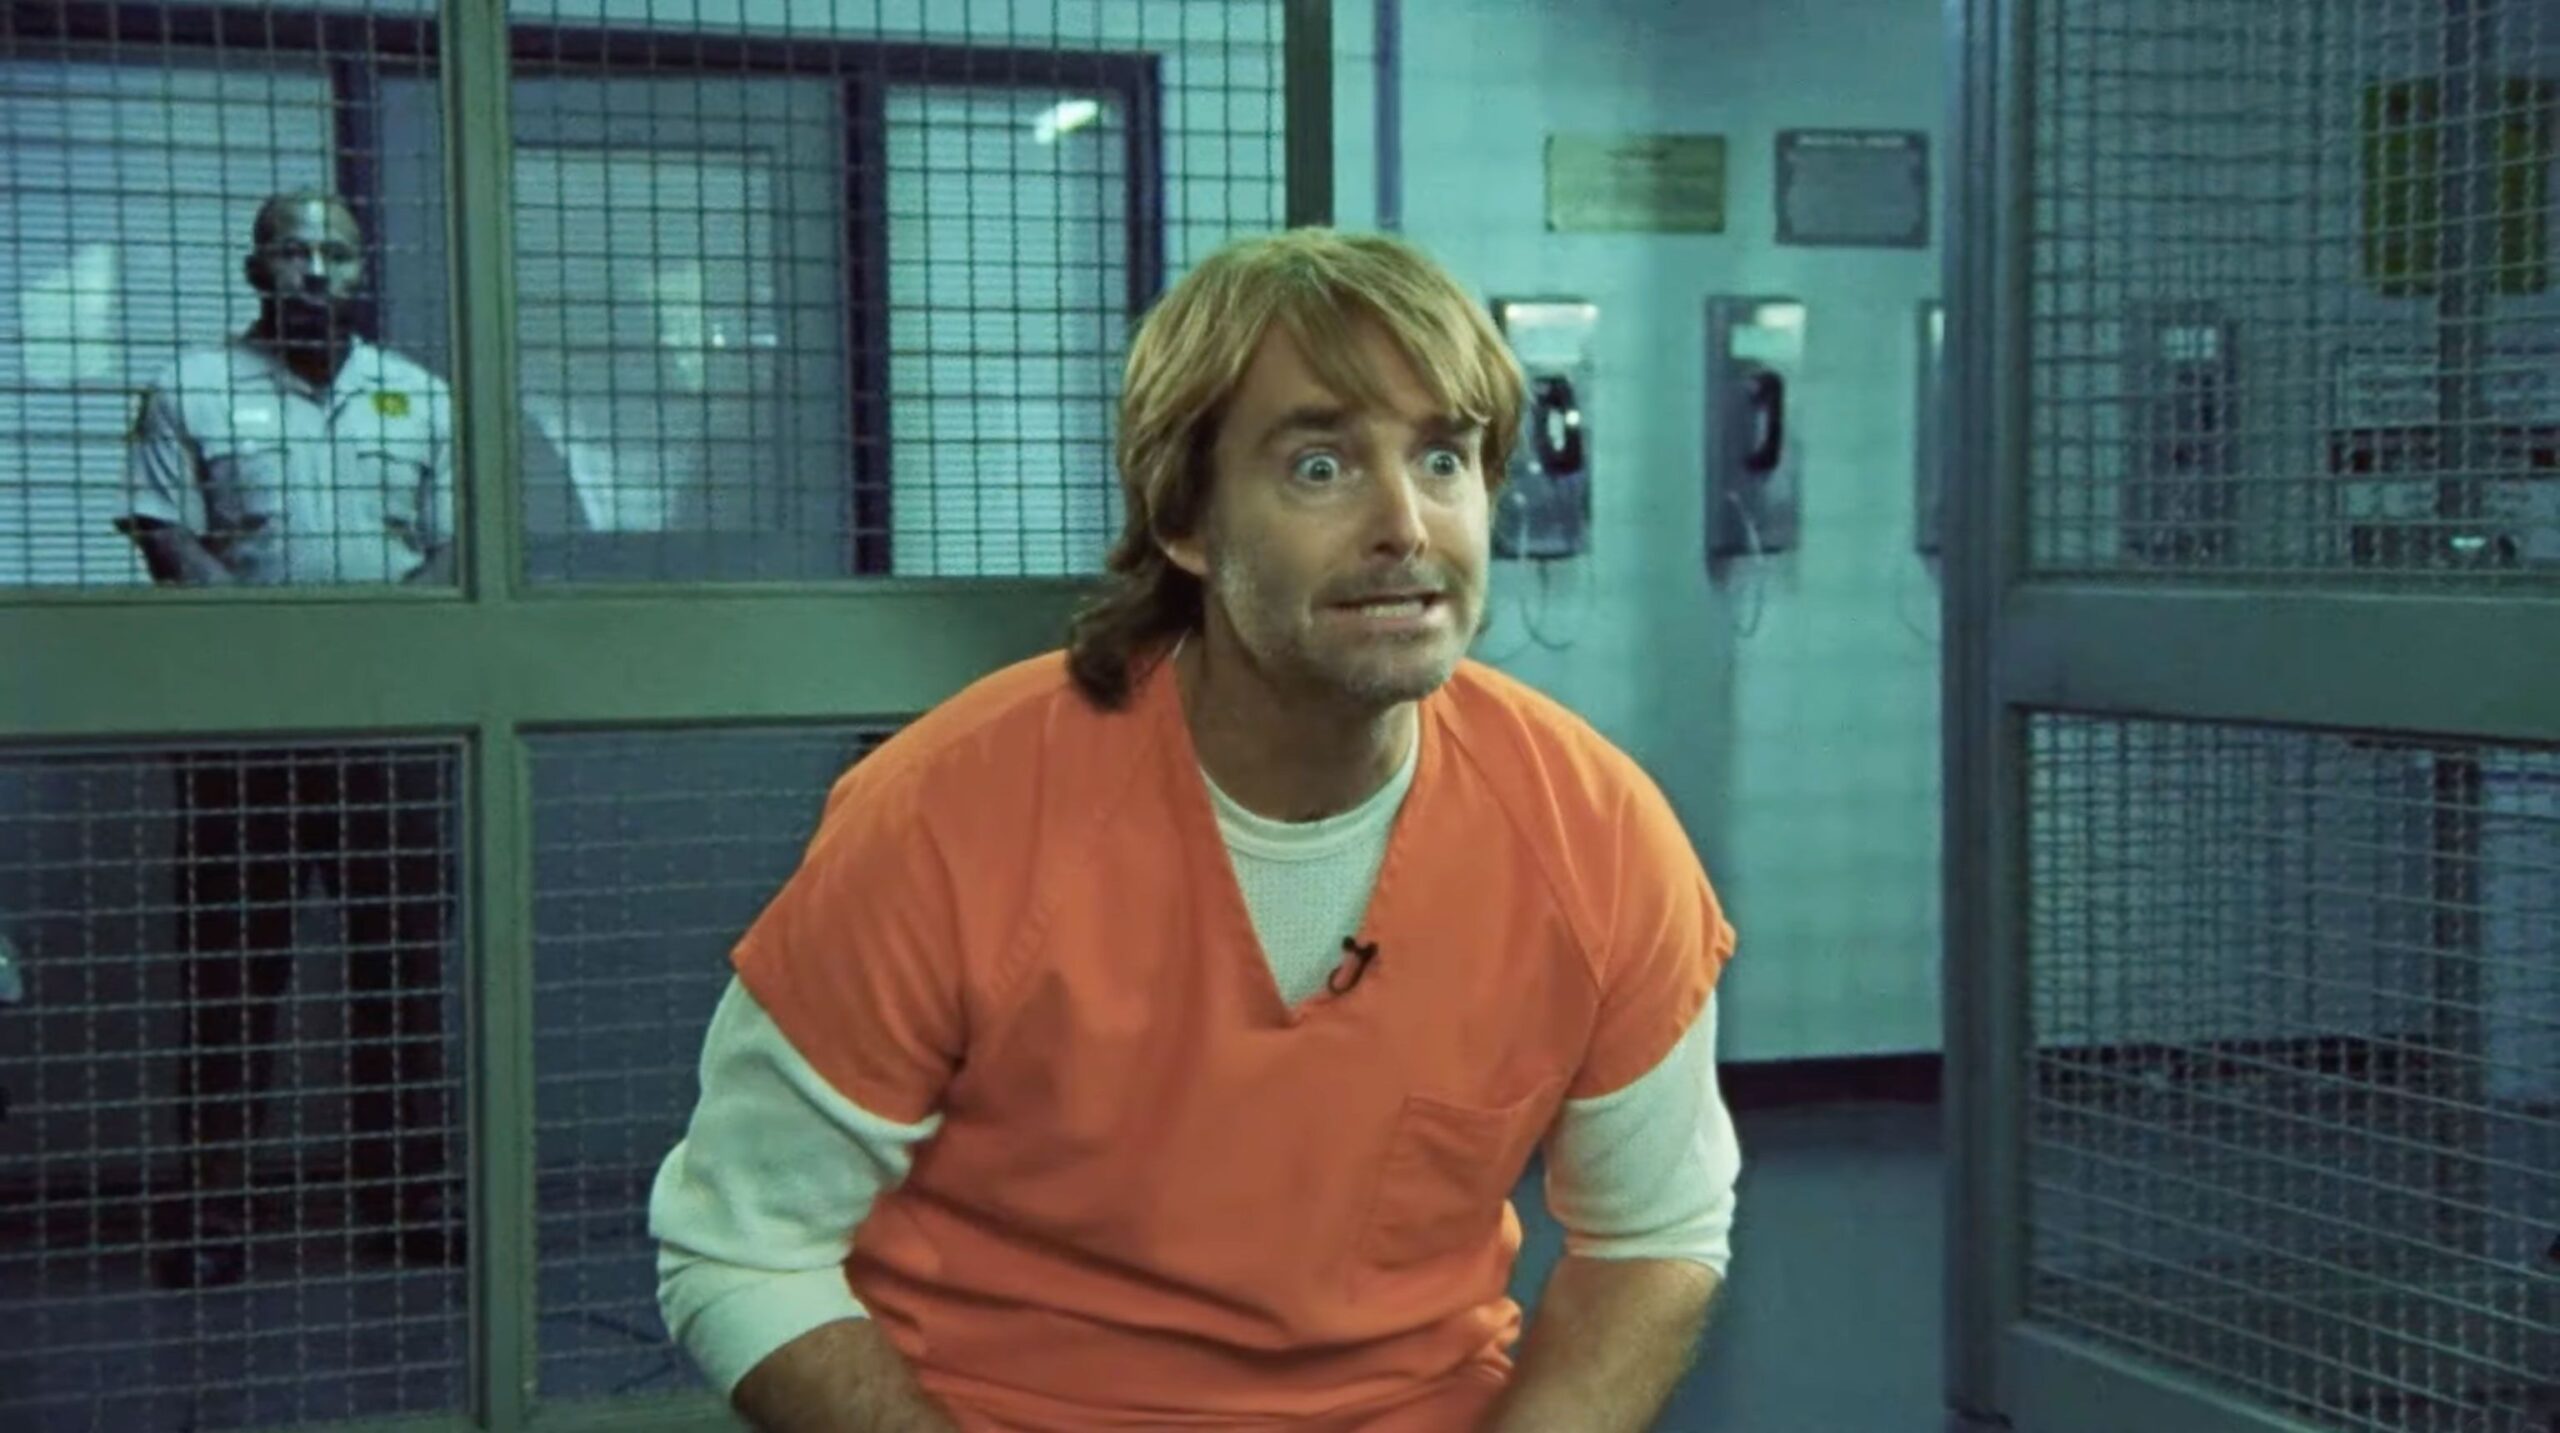 ‘MacGruber’ Breaks His Silence From Prison In New Clip From The Peacock Series